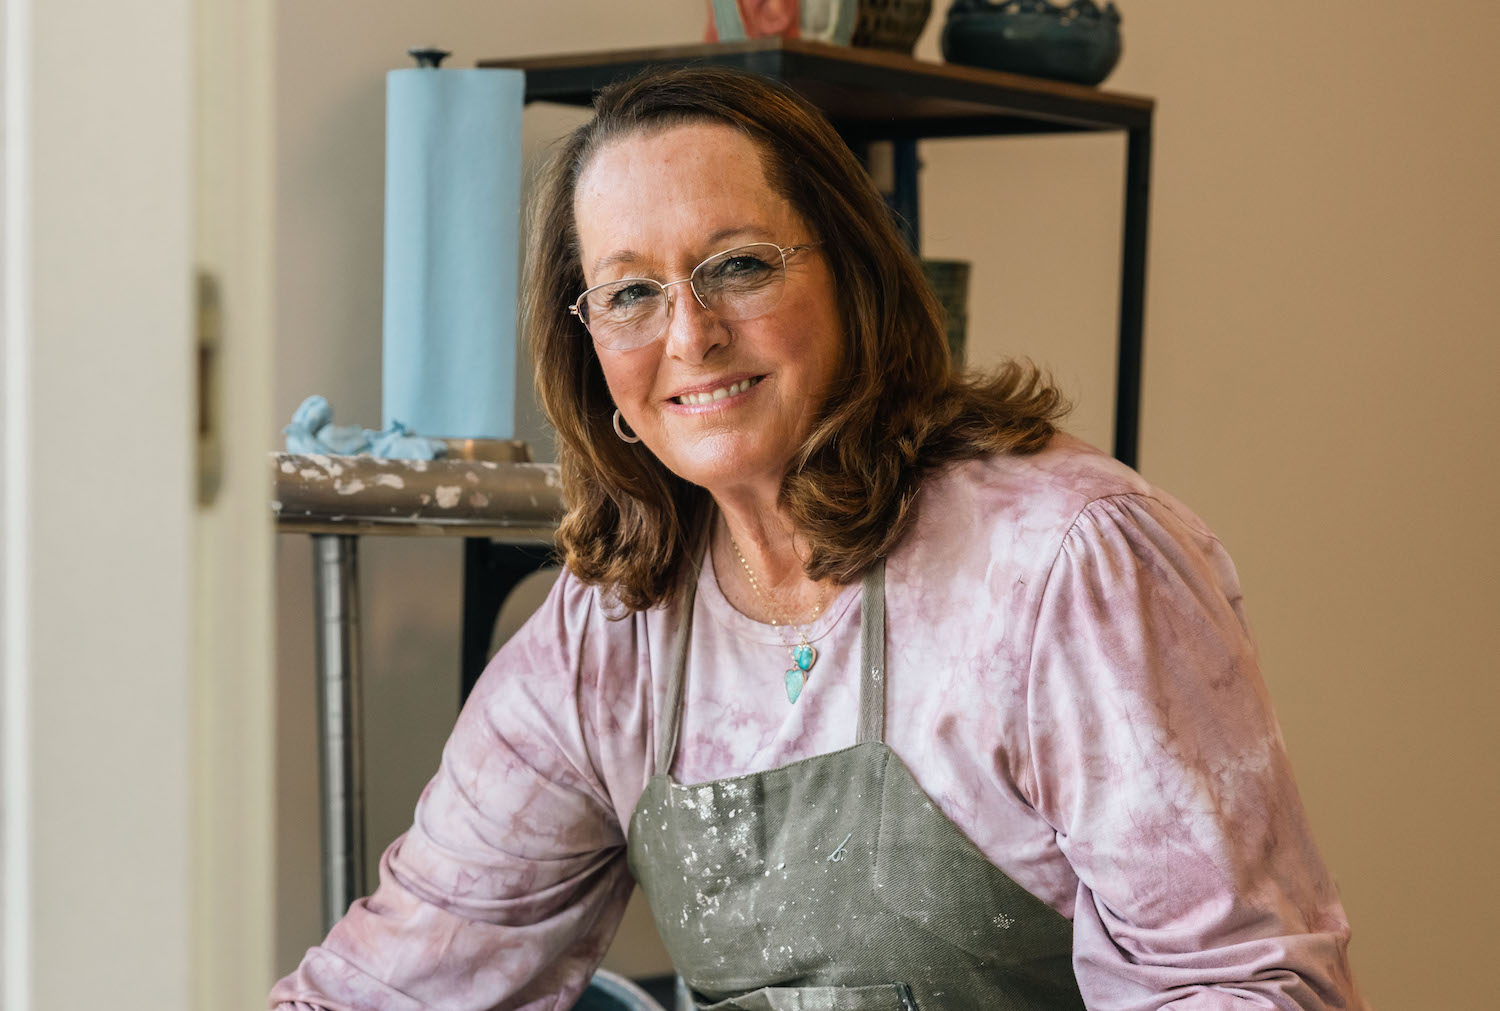 Marcia Johnson, founder of the OURS Art Foundation, a San Diego nonprofit focused on helping victims of trauma through art therapy, in her pottery studio